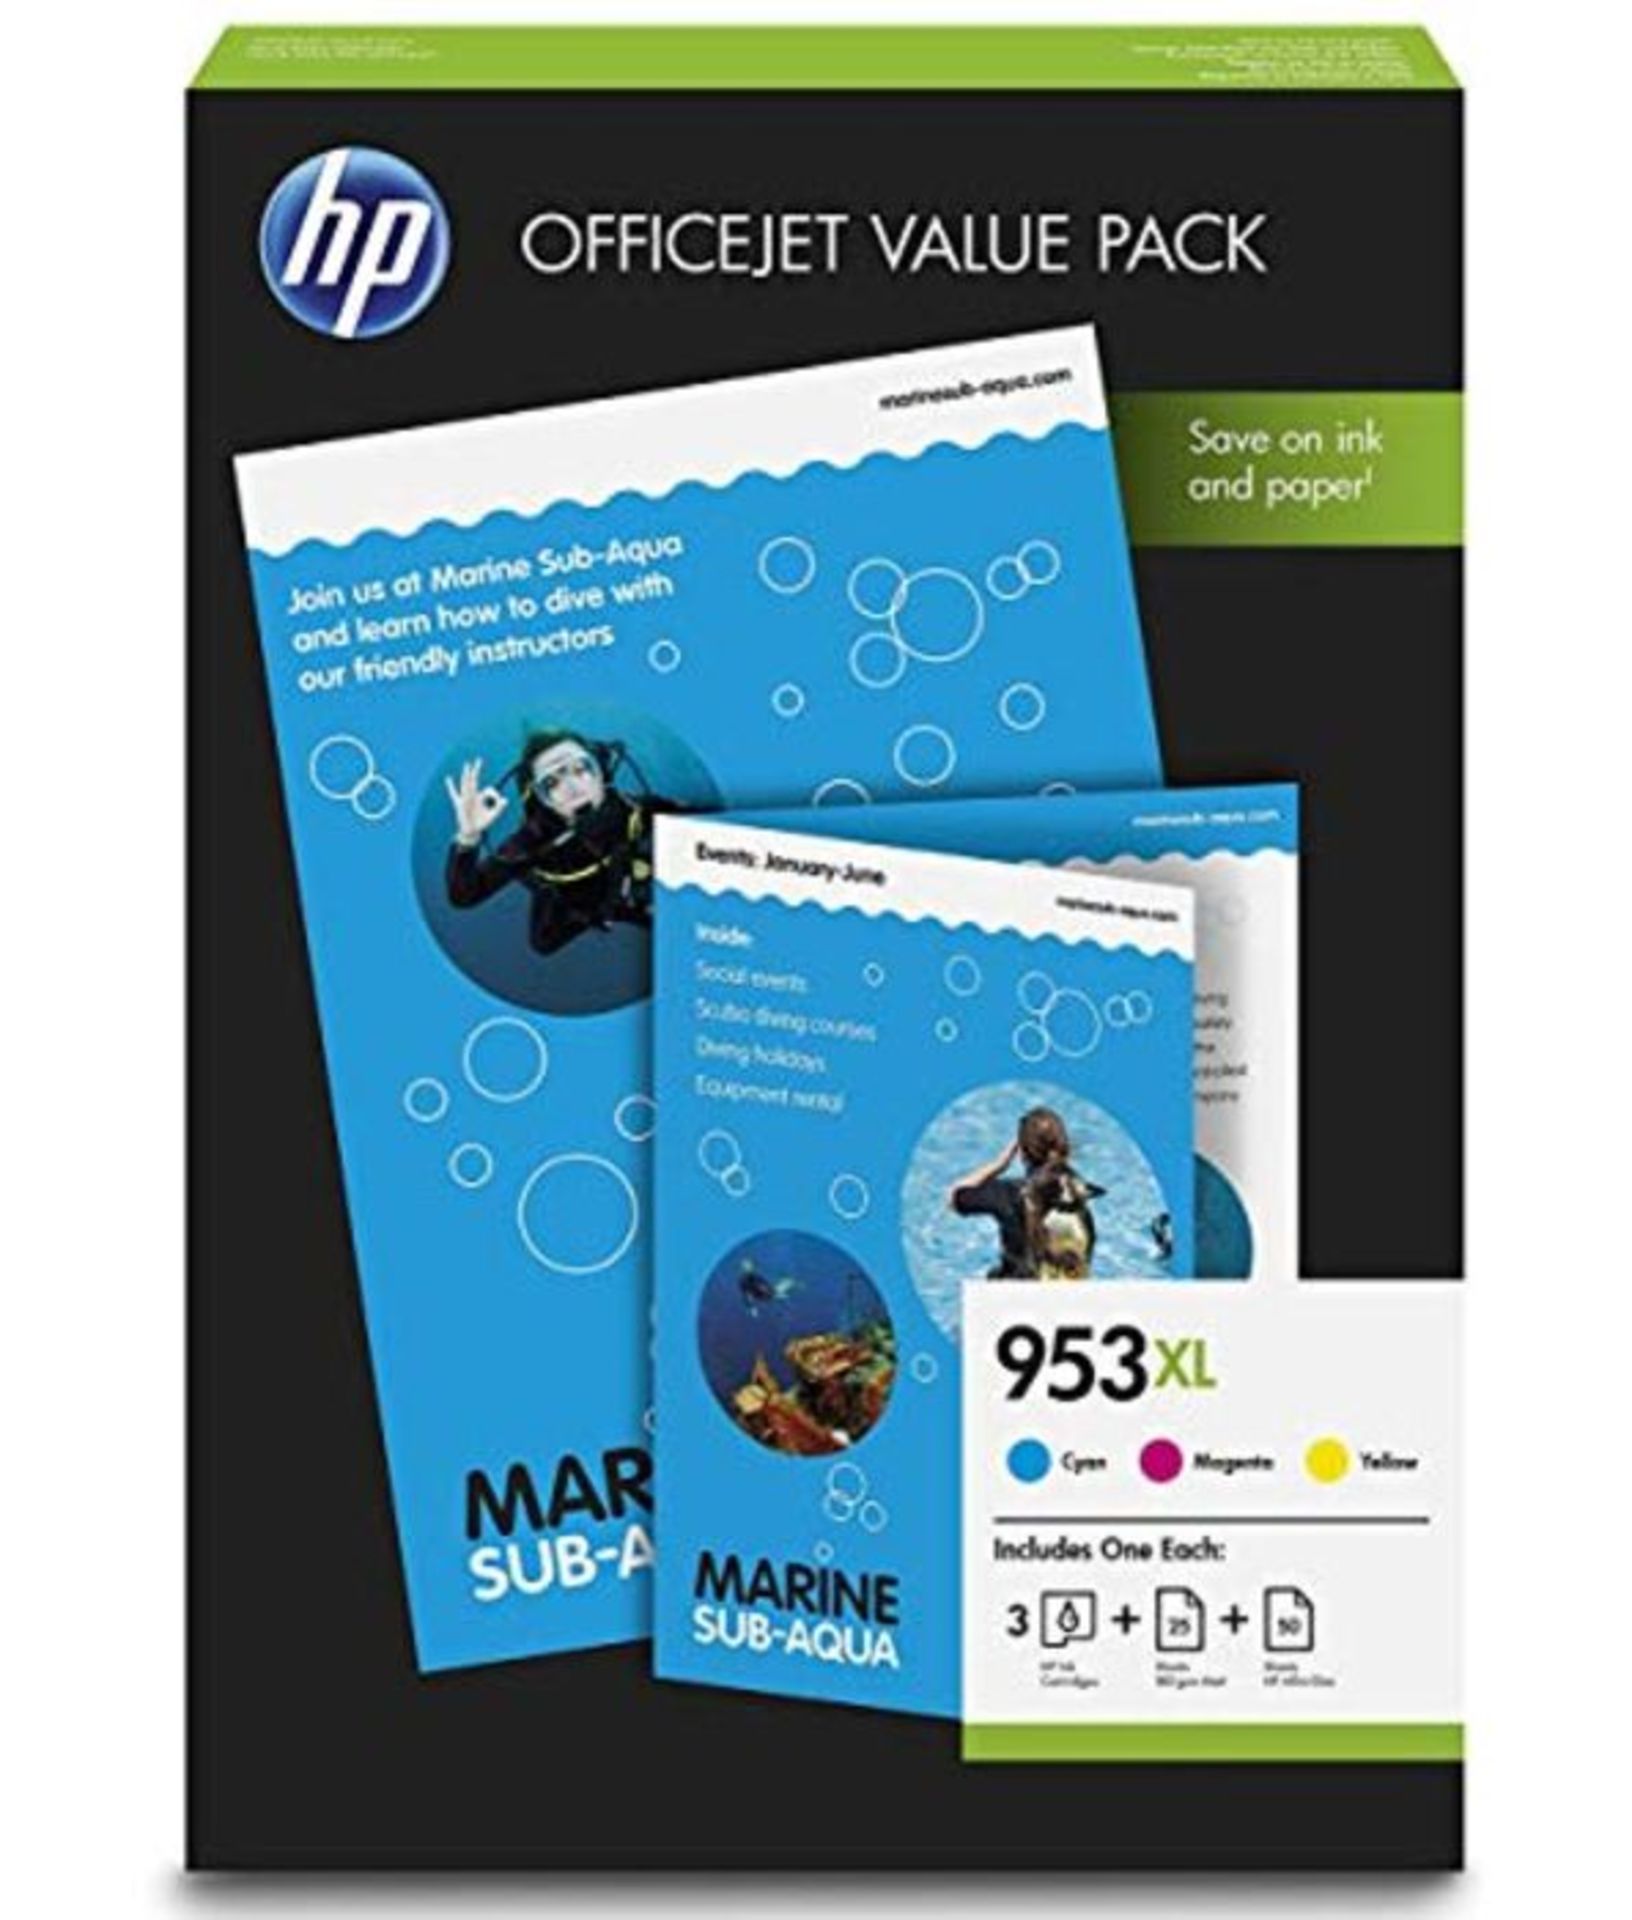 RRP £69.00 HP 1CC21AE 953XL Officejet Value Pack, Cyan, Magenta and Yellow, Multipack